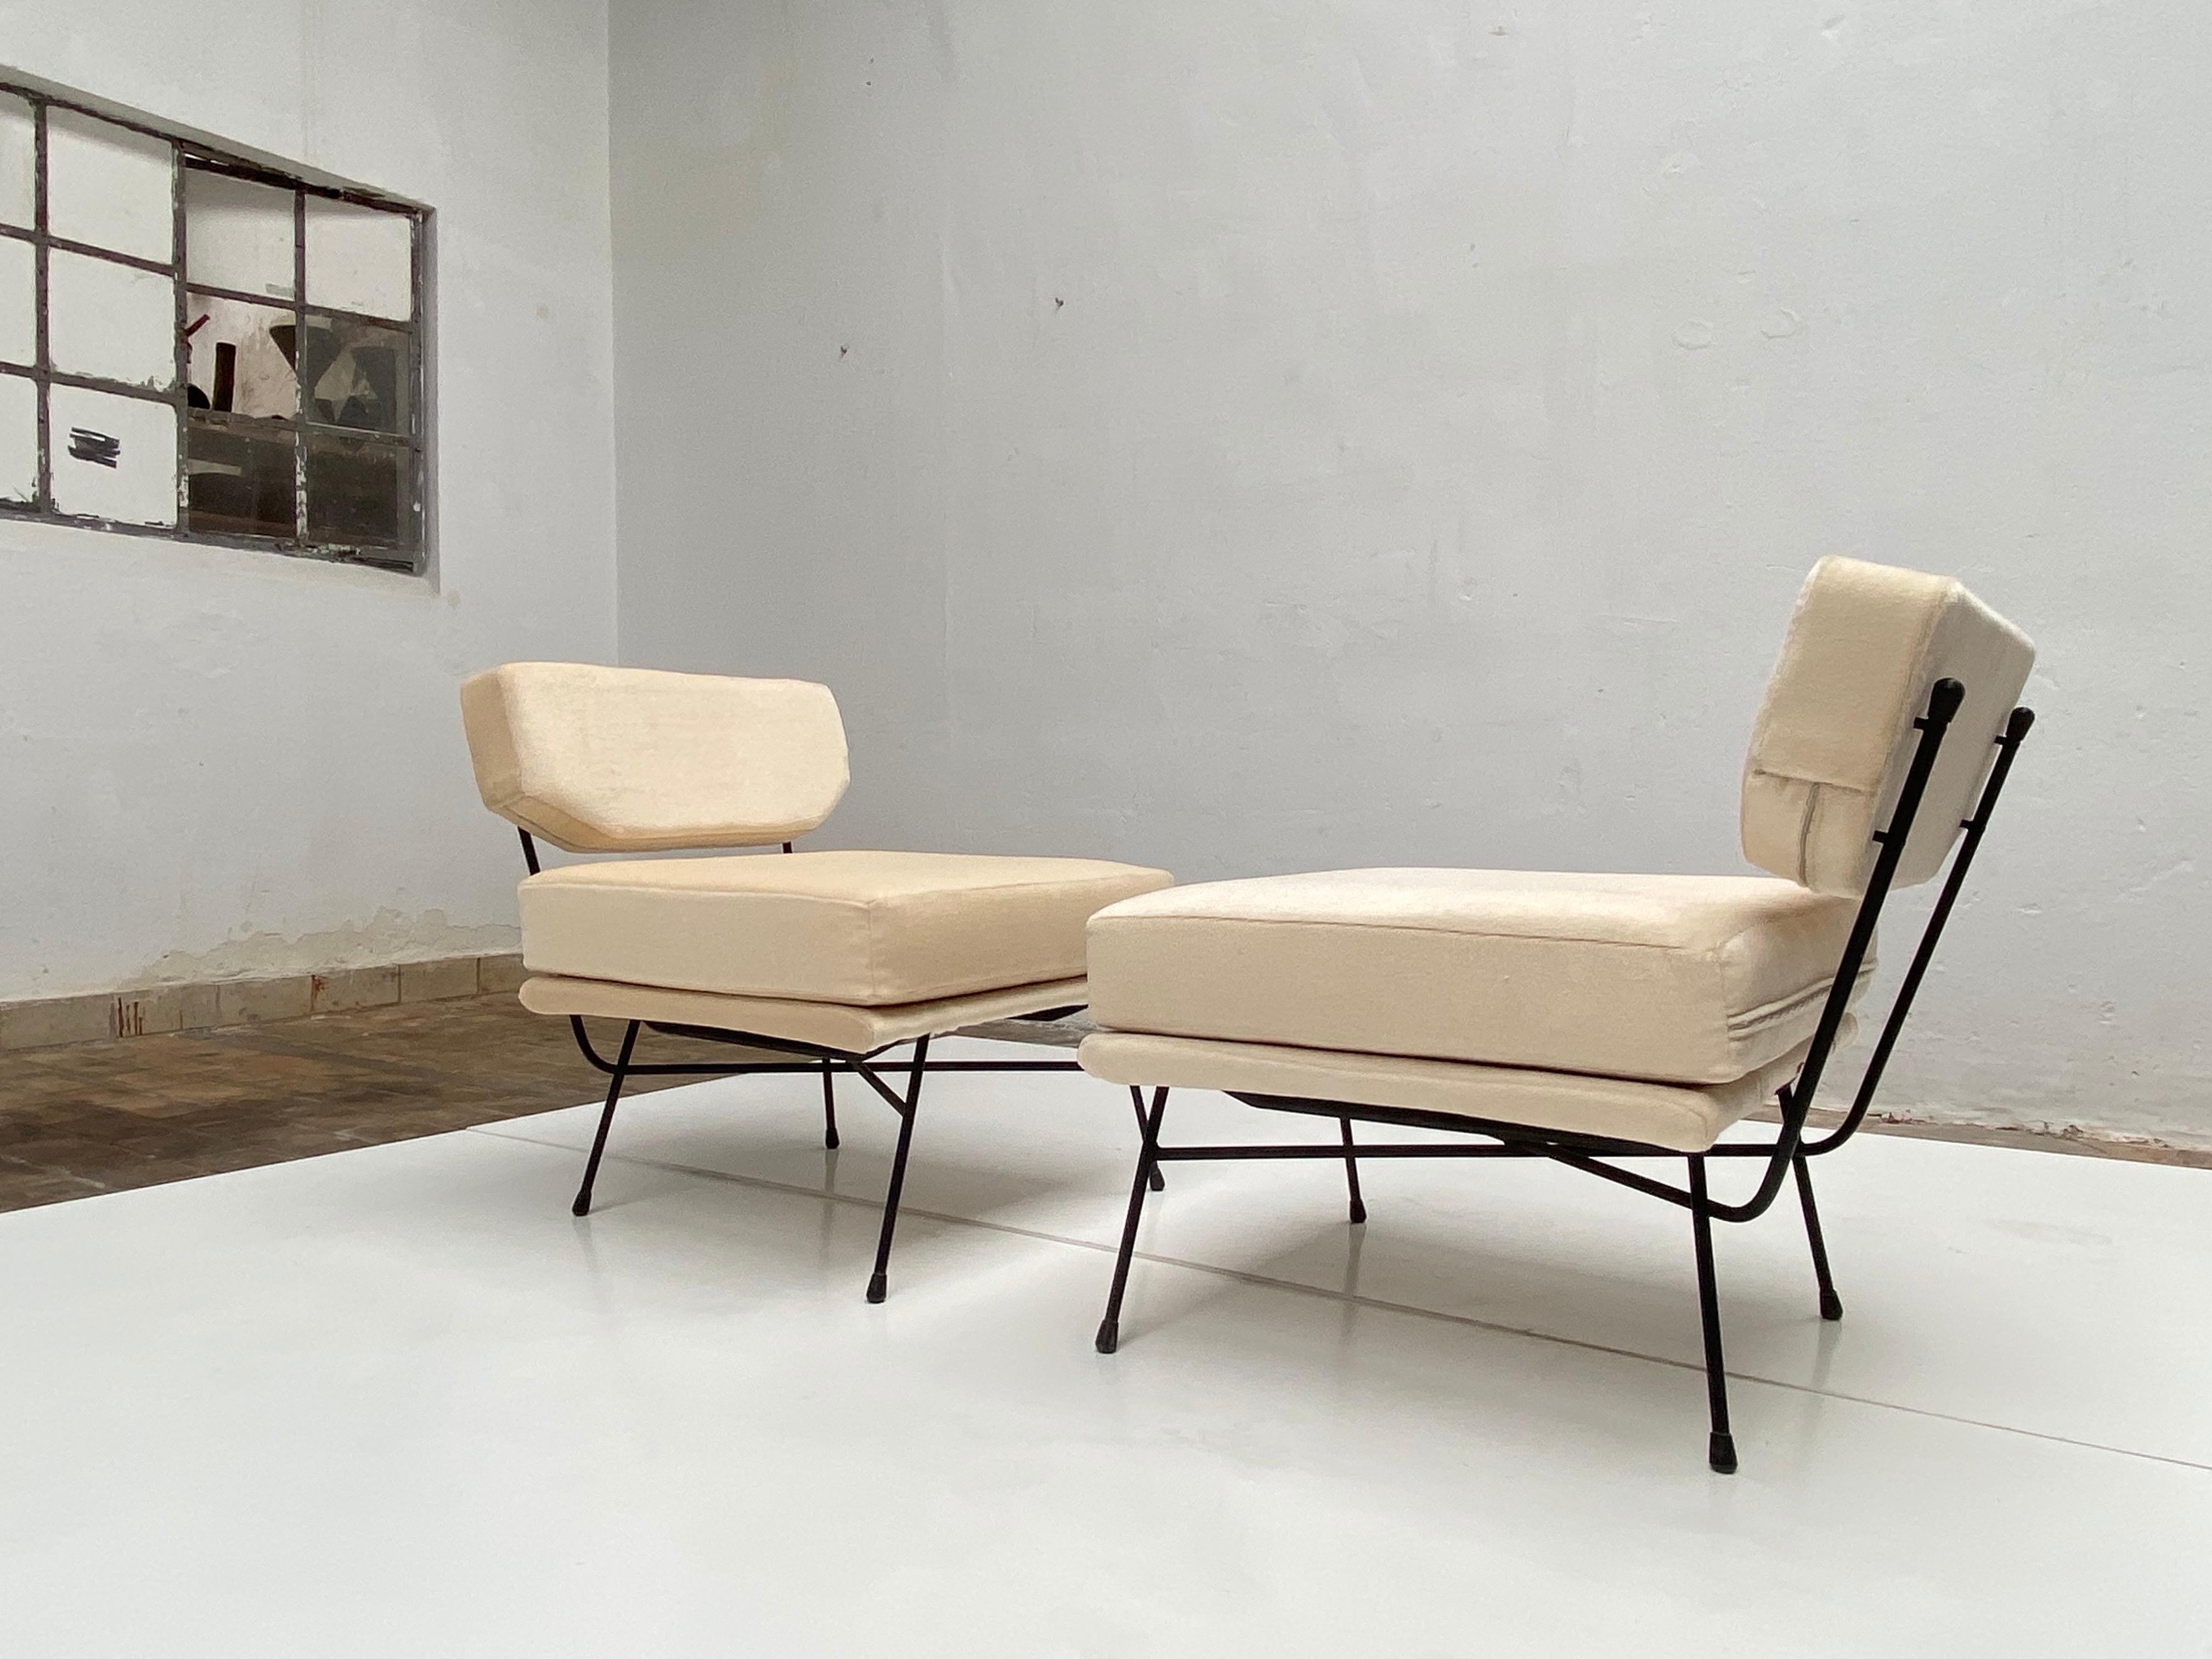 Cast Pair of 'Elettra' Lounge Chairs by BBPR, Arflex, Italy 1953, Compasso D'Oro 1954 For Sale